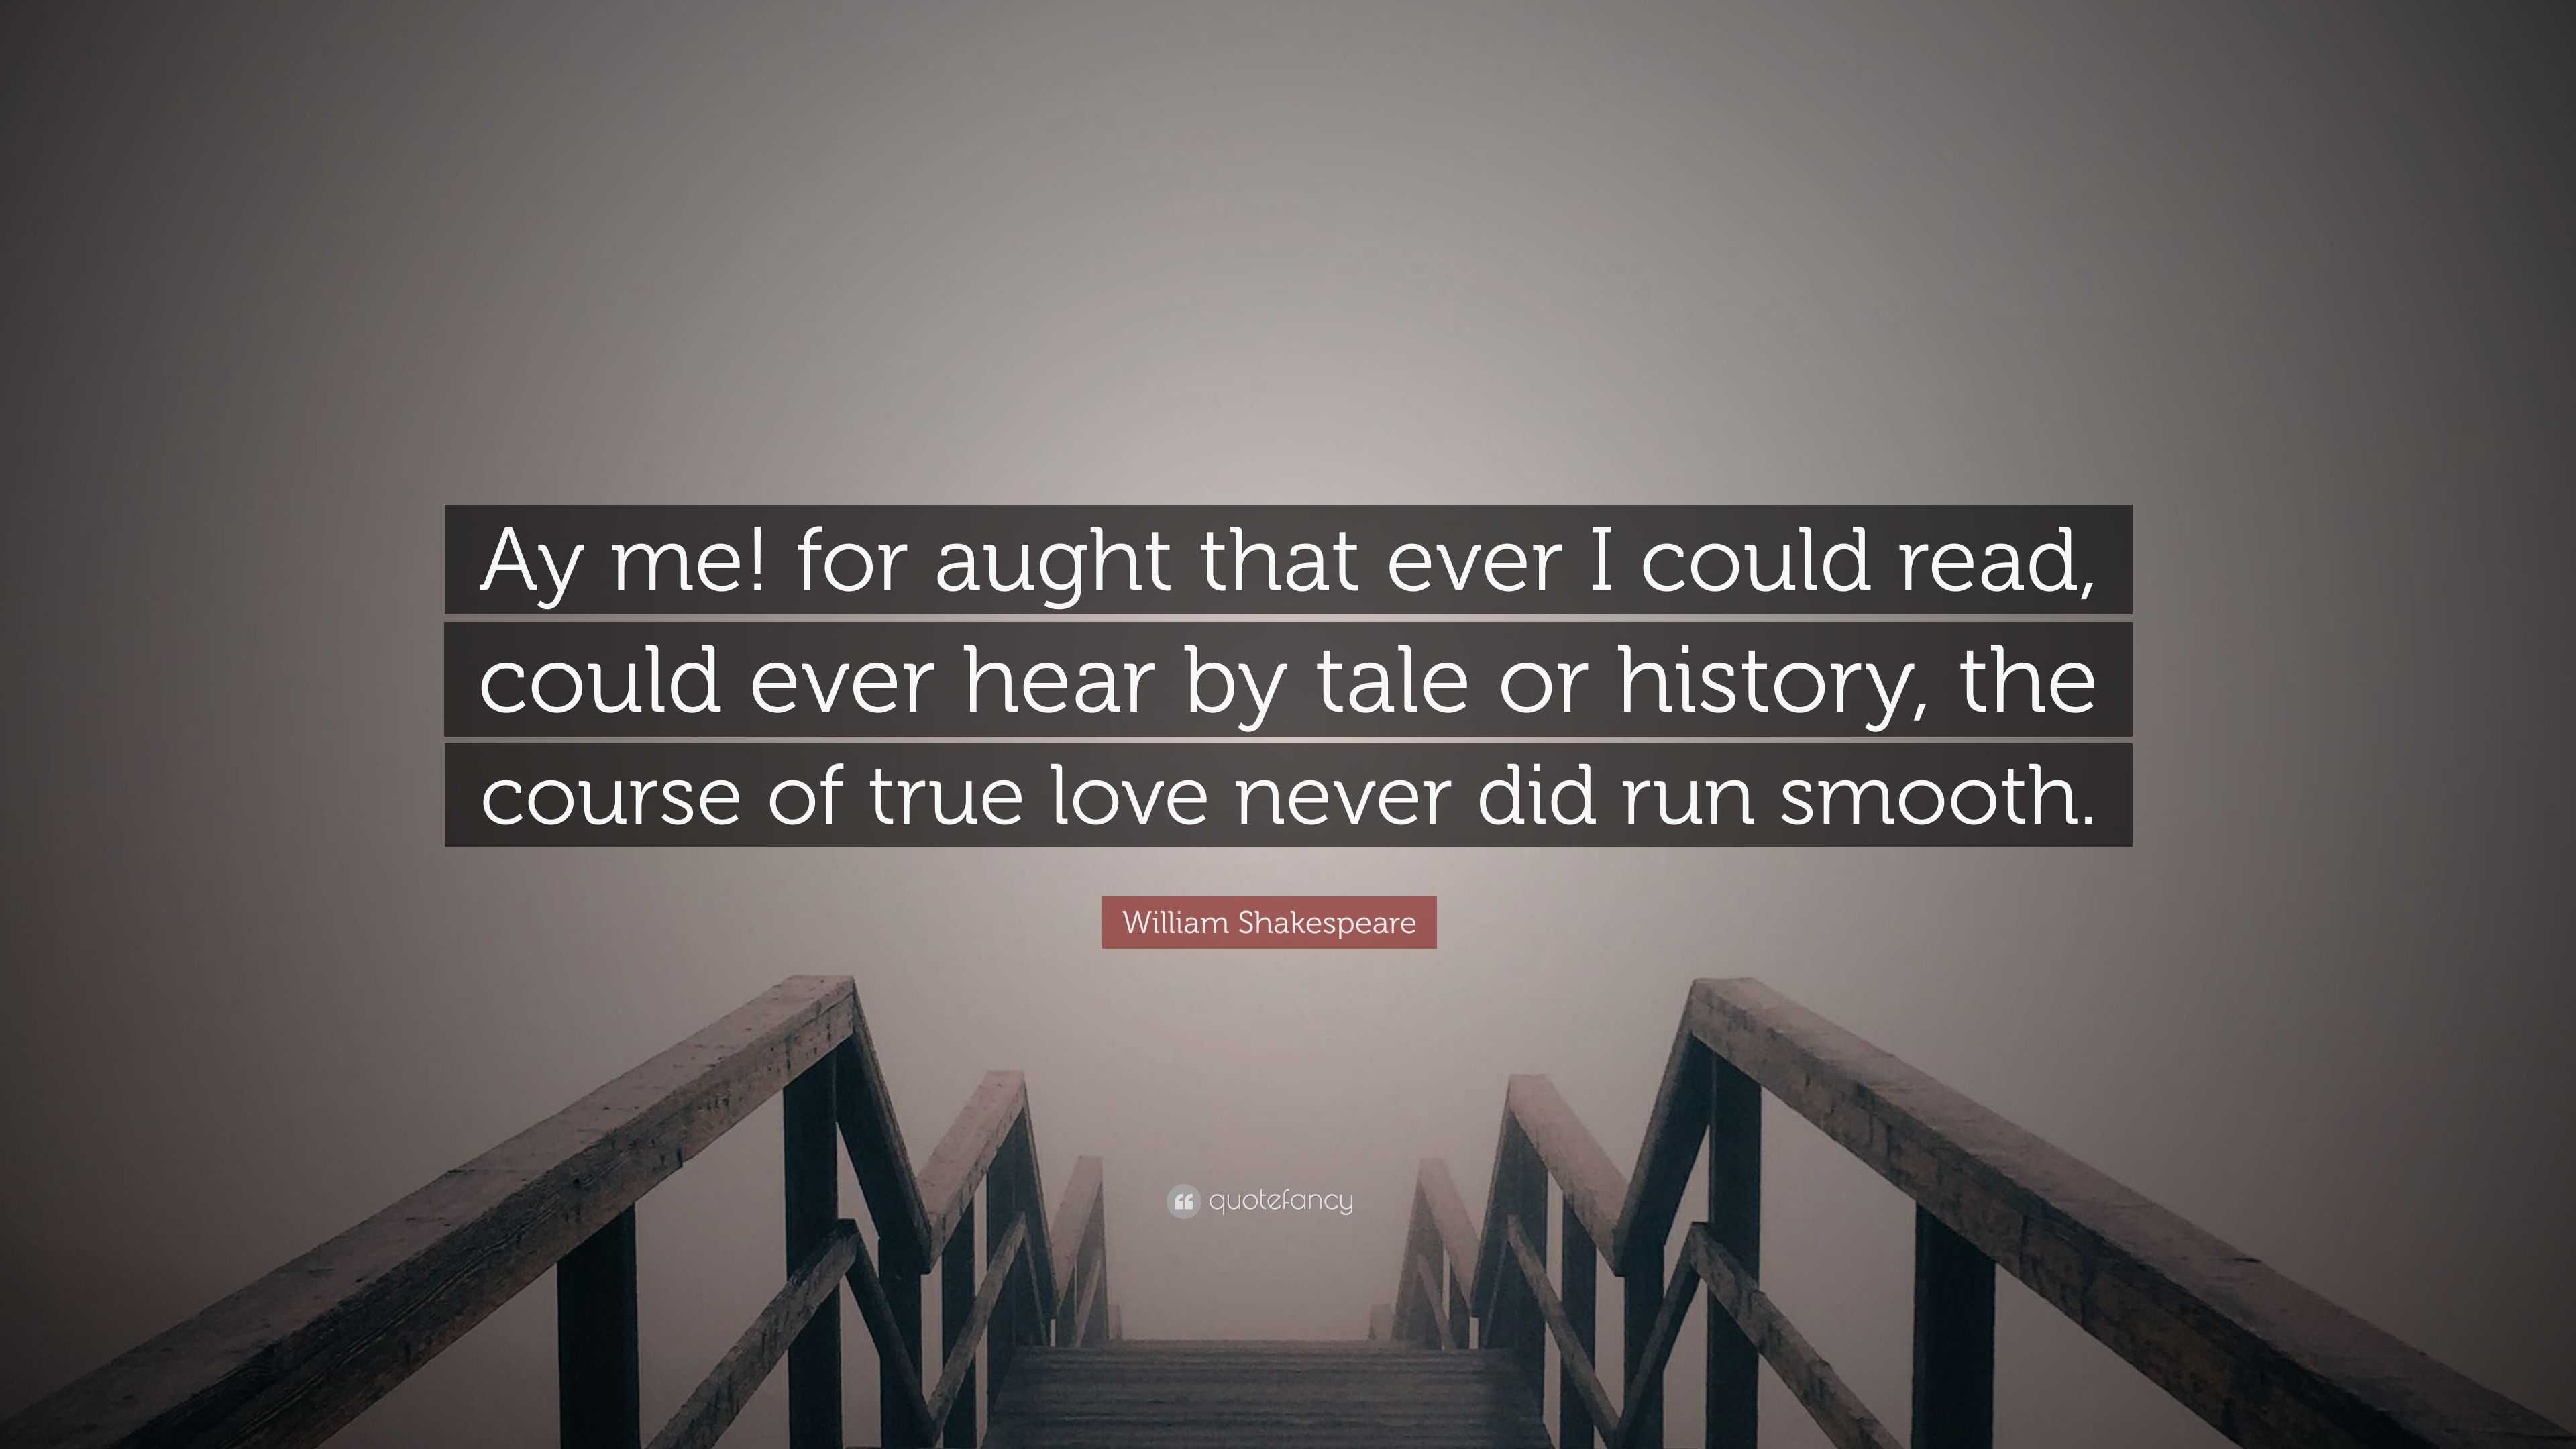 William Shakespeare Quote “Ay me for aught that ever I could read